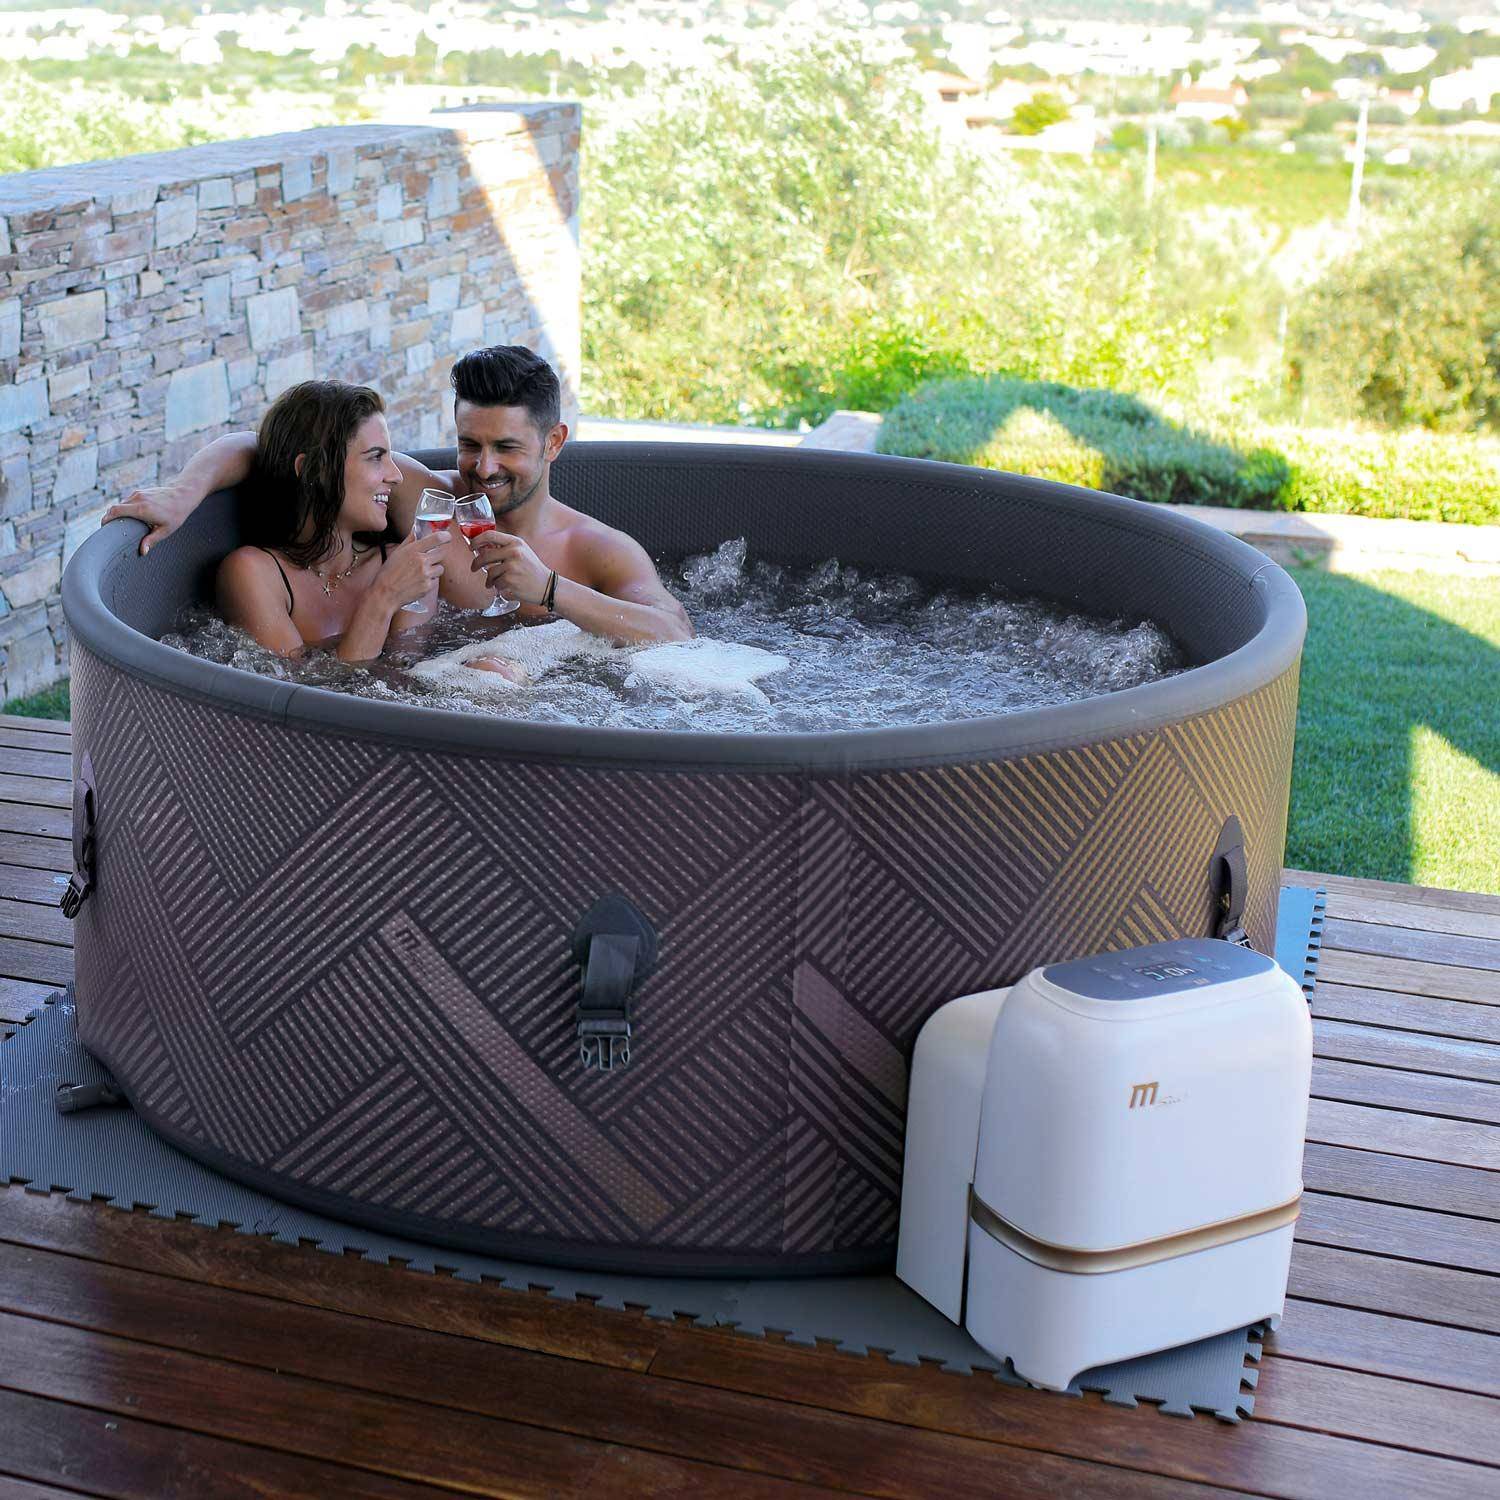  6-person premium round inflatable hot tub MSpa - Ø173cm round 6-person spa, reinforced PVC, pump, heating, filters, cover, floor mat - Mono 6 - Grey,sweeek,Photo1